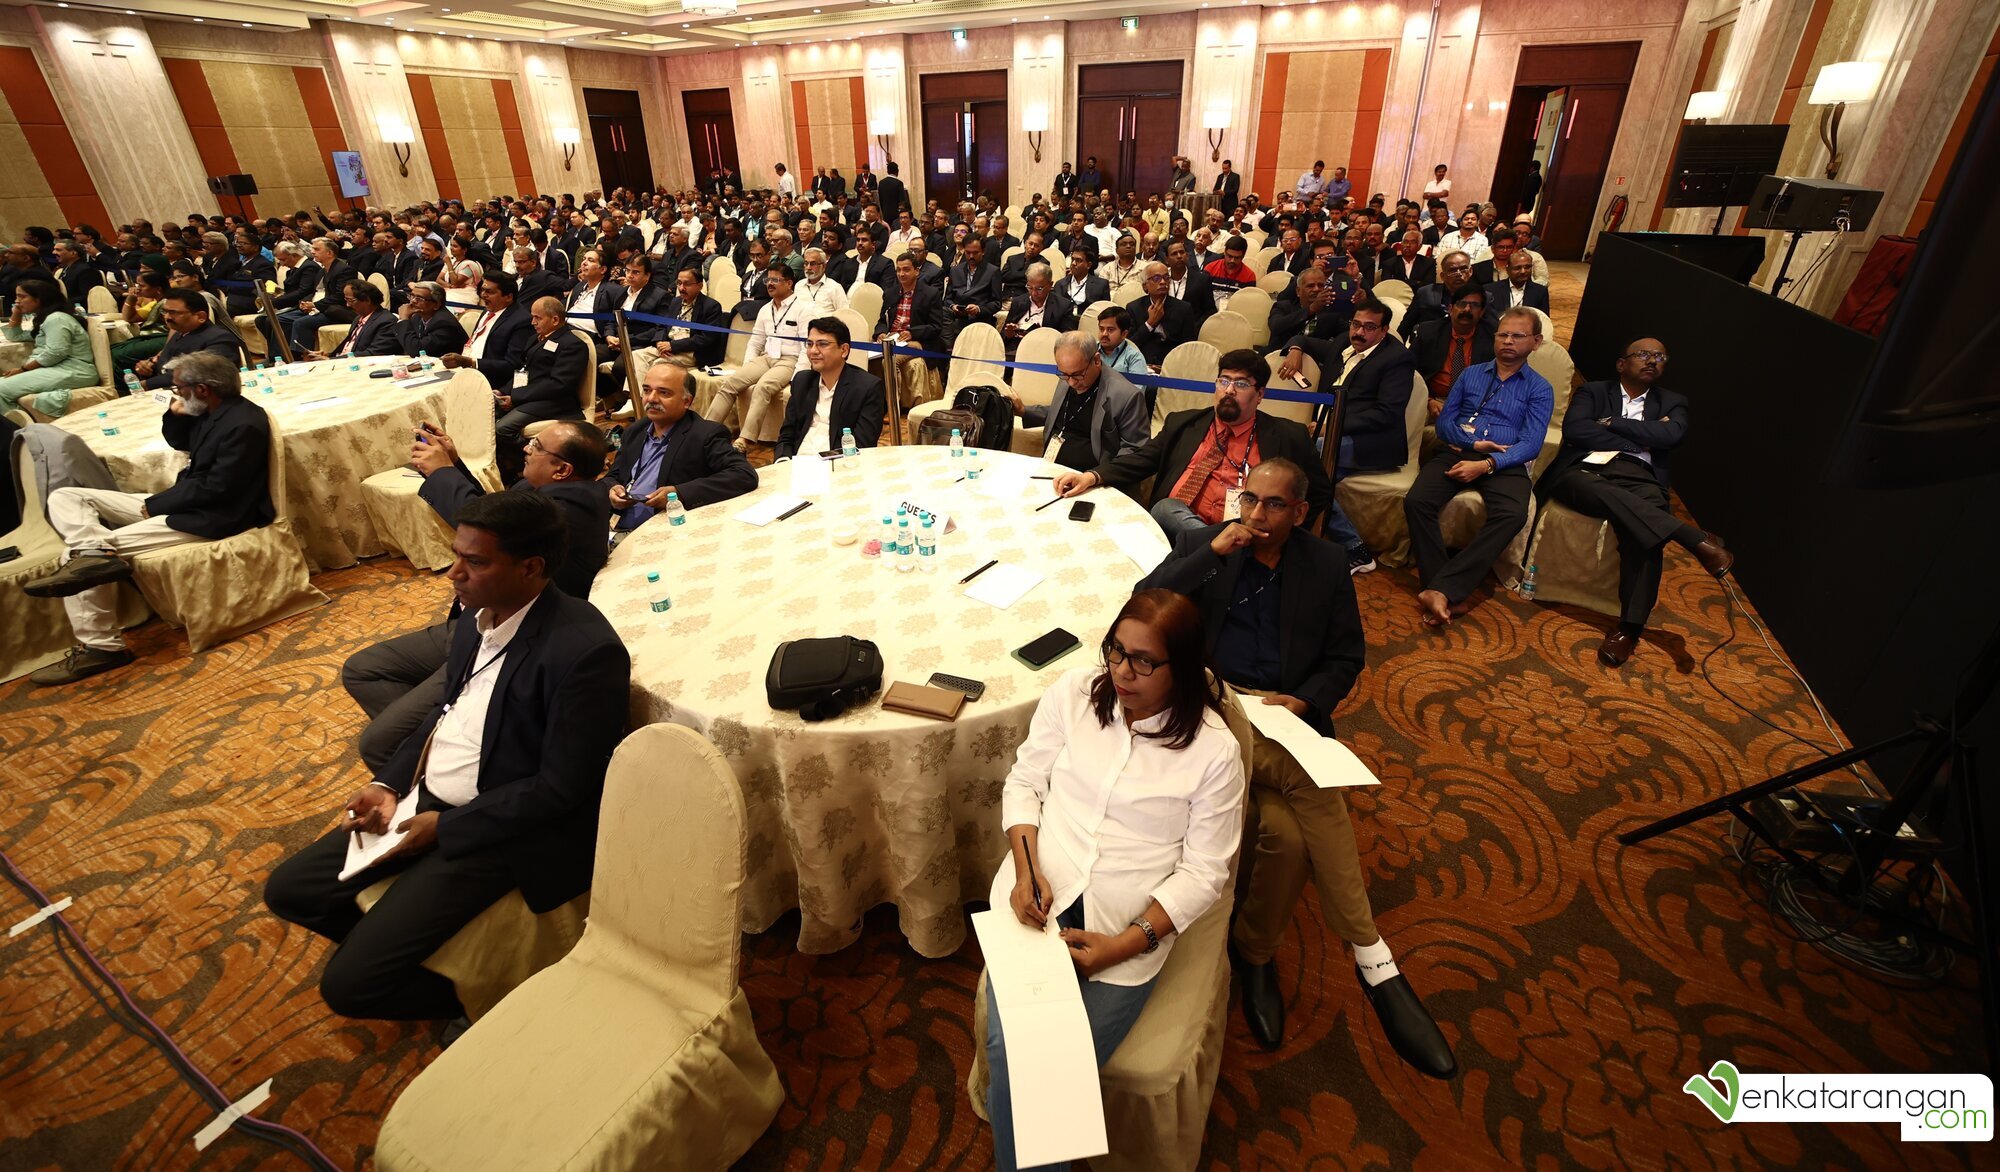 Audience members attentively listening to a presentation about Generative AI and LLM by Venkatararangan Thirumalai, at the IFA Galaxy 2024 event